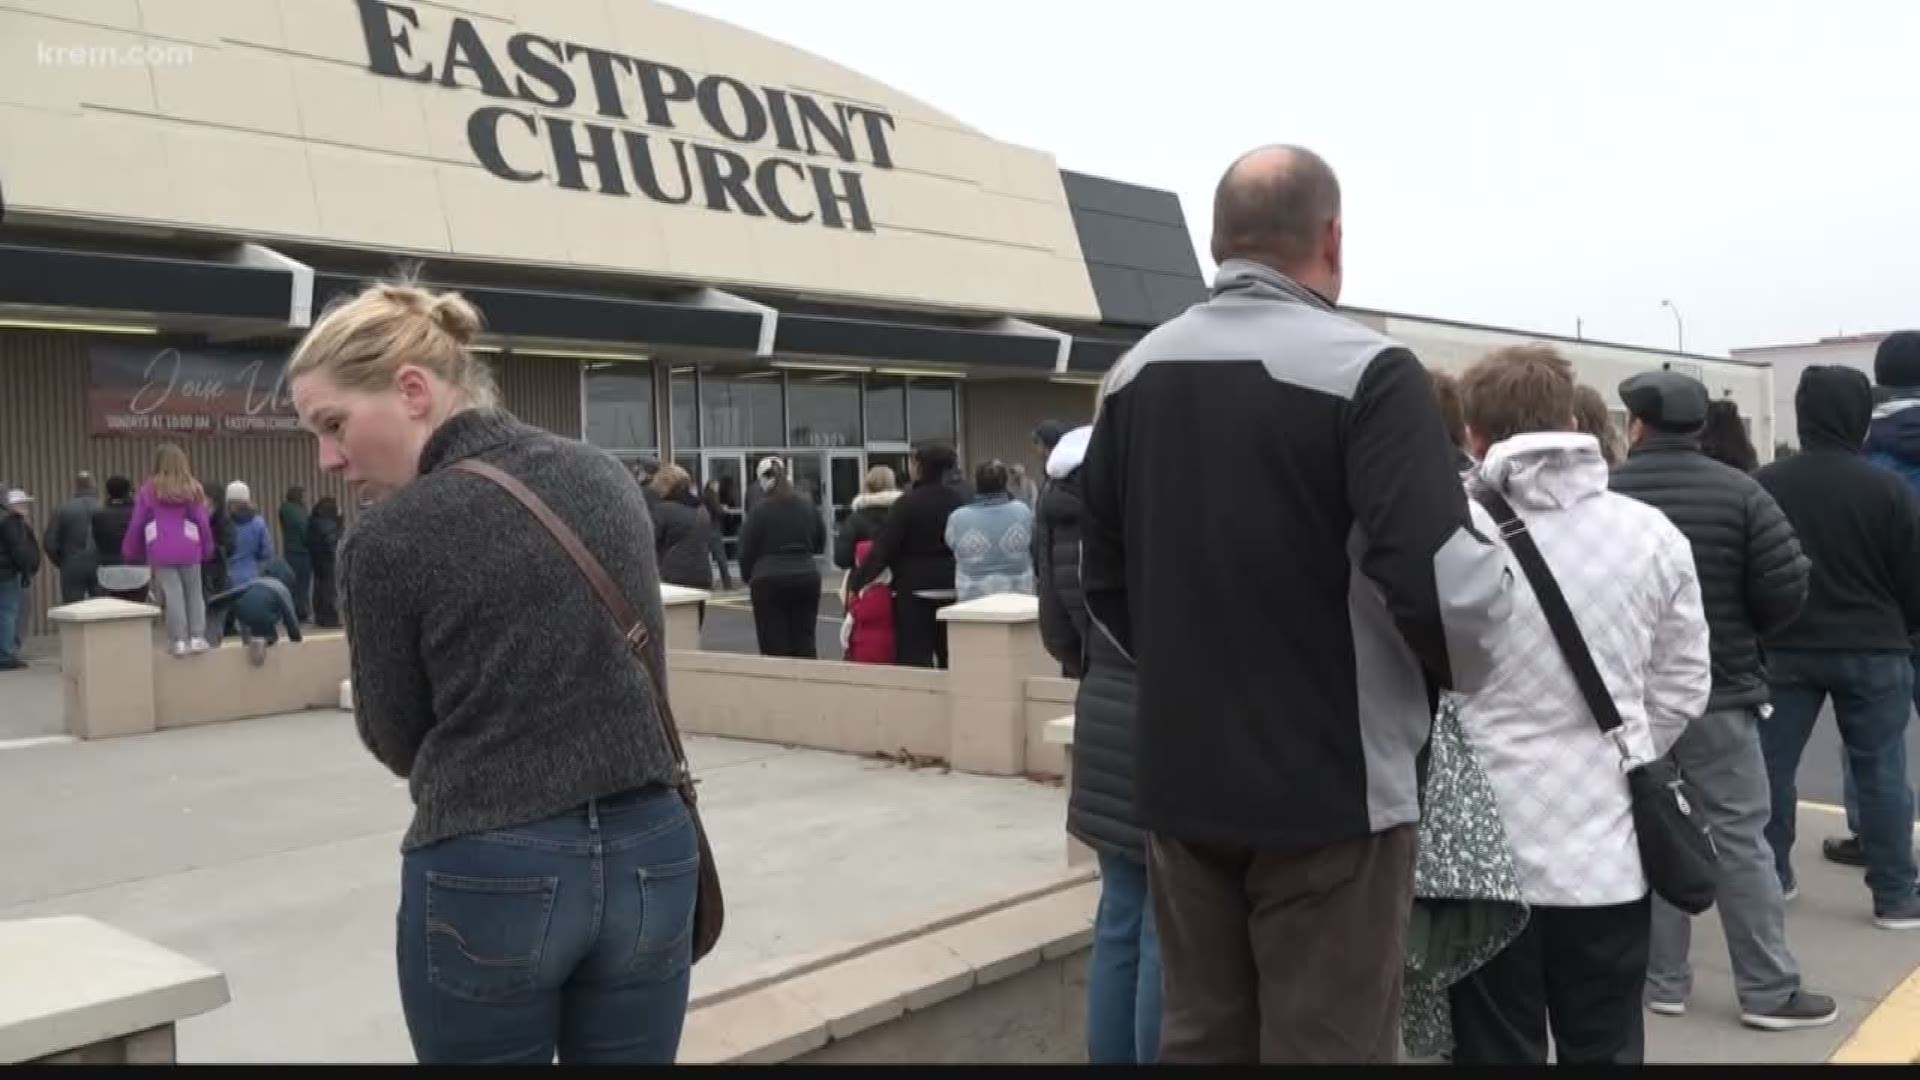 Students can go back to school to get their belongings tomorrow morning from 8 to 10. Many had to wait down the street at eastpoint church Friday morning.